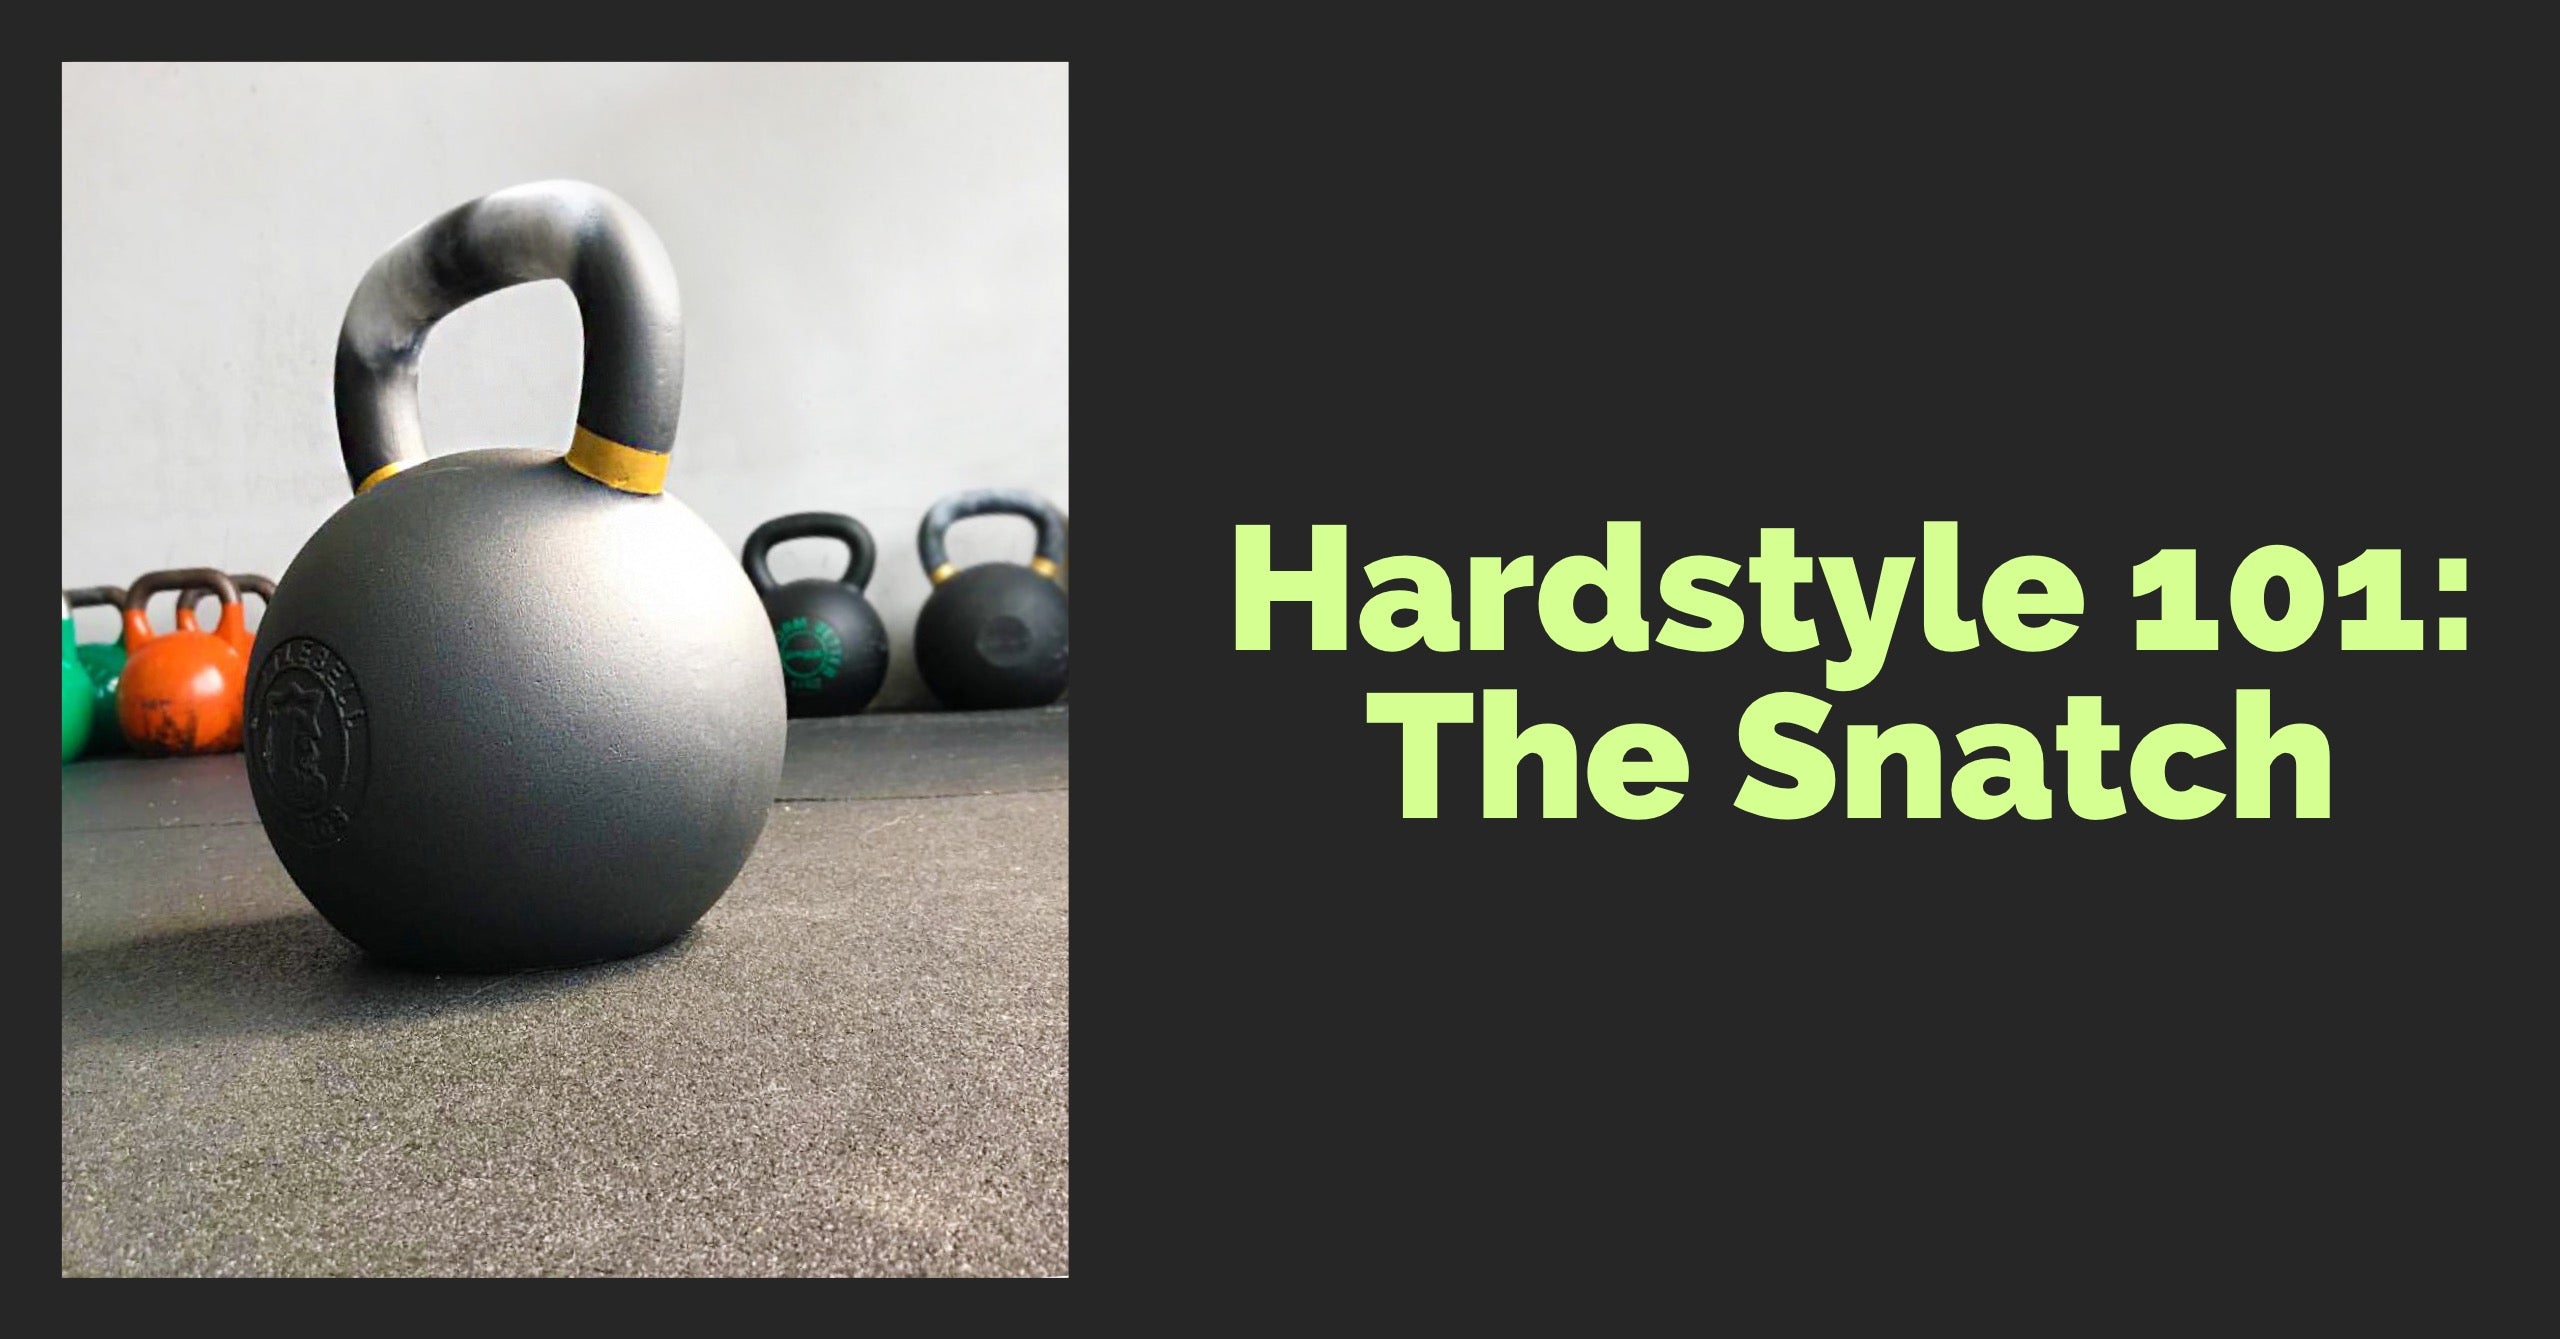 Hardstyle 101: The Snatch